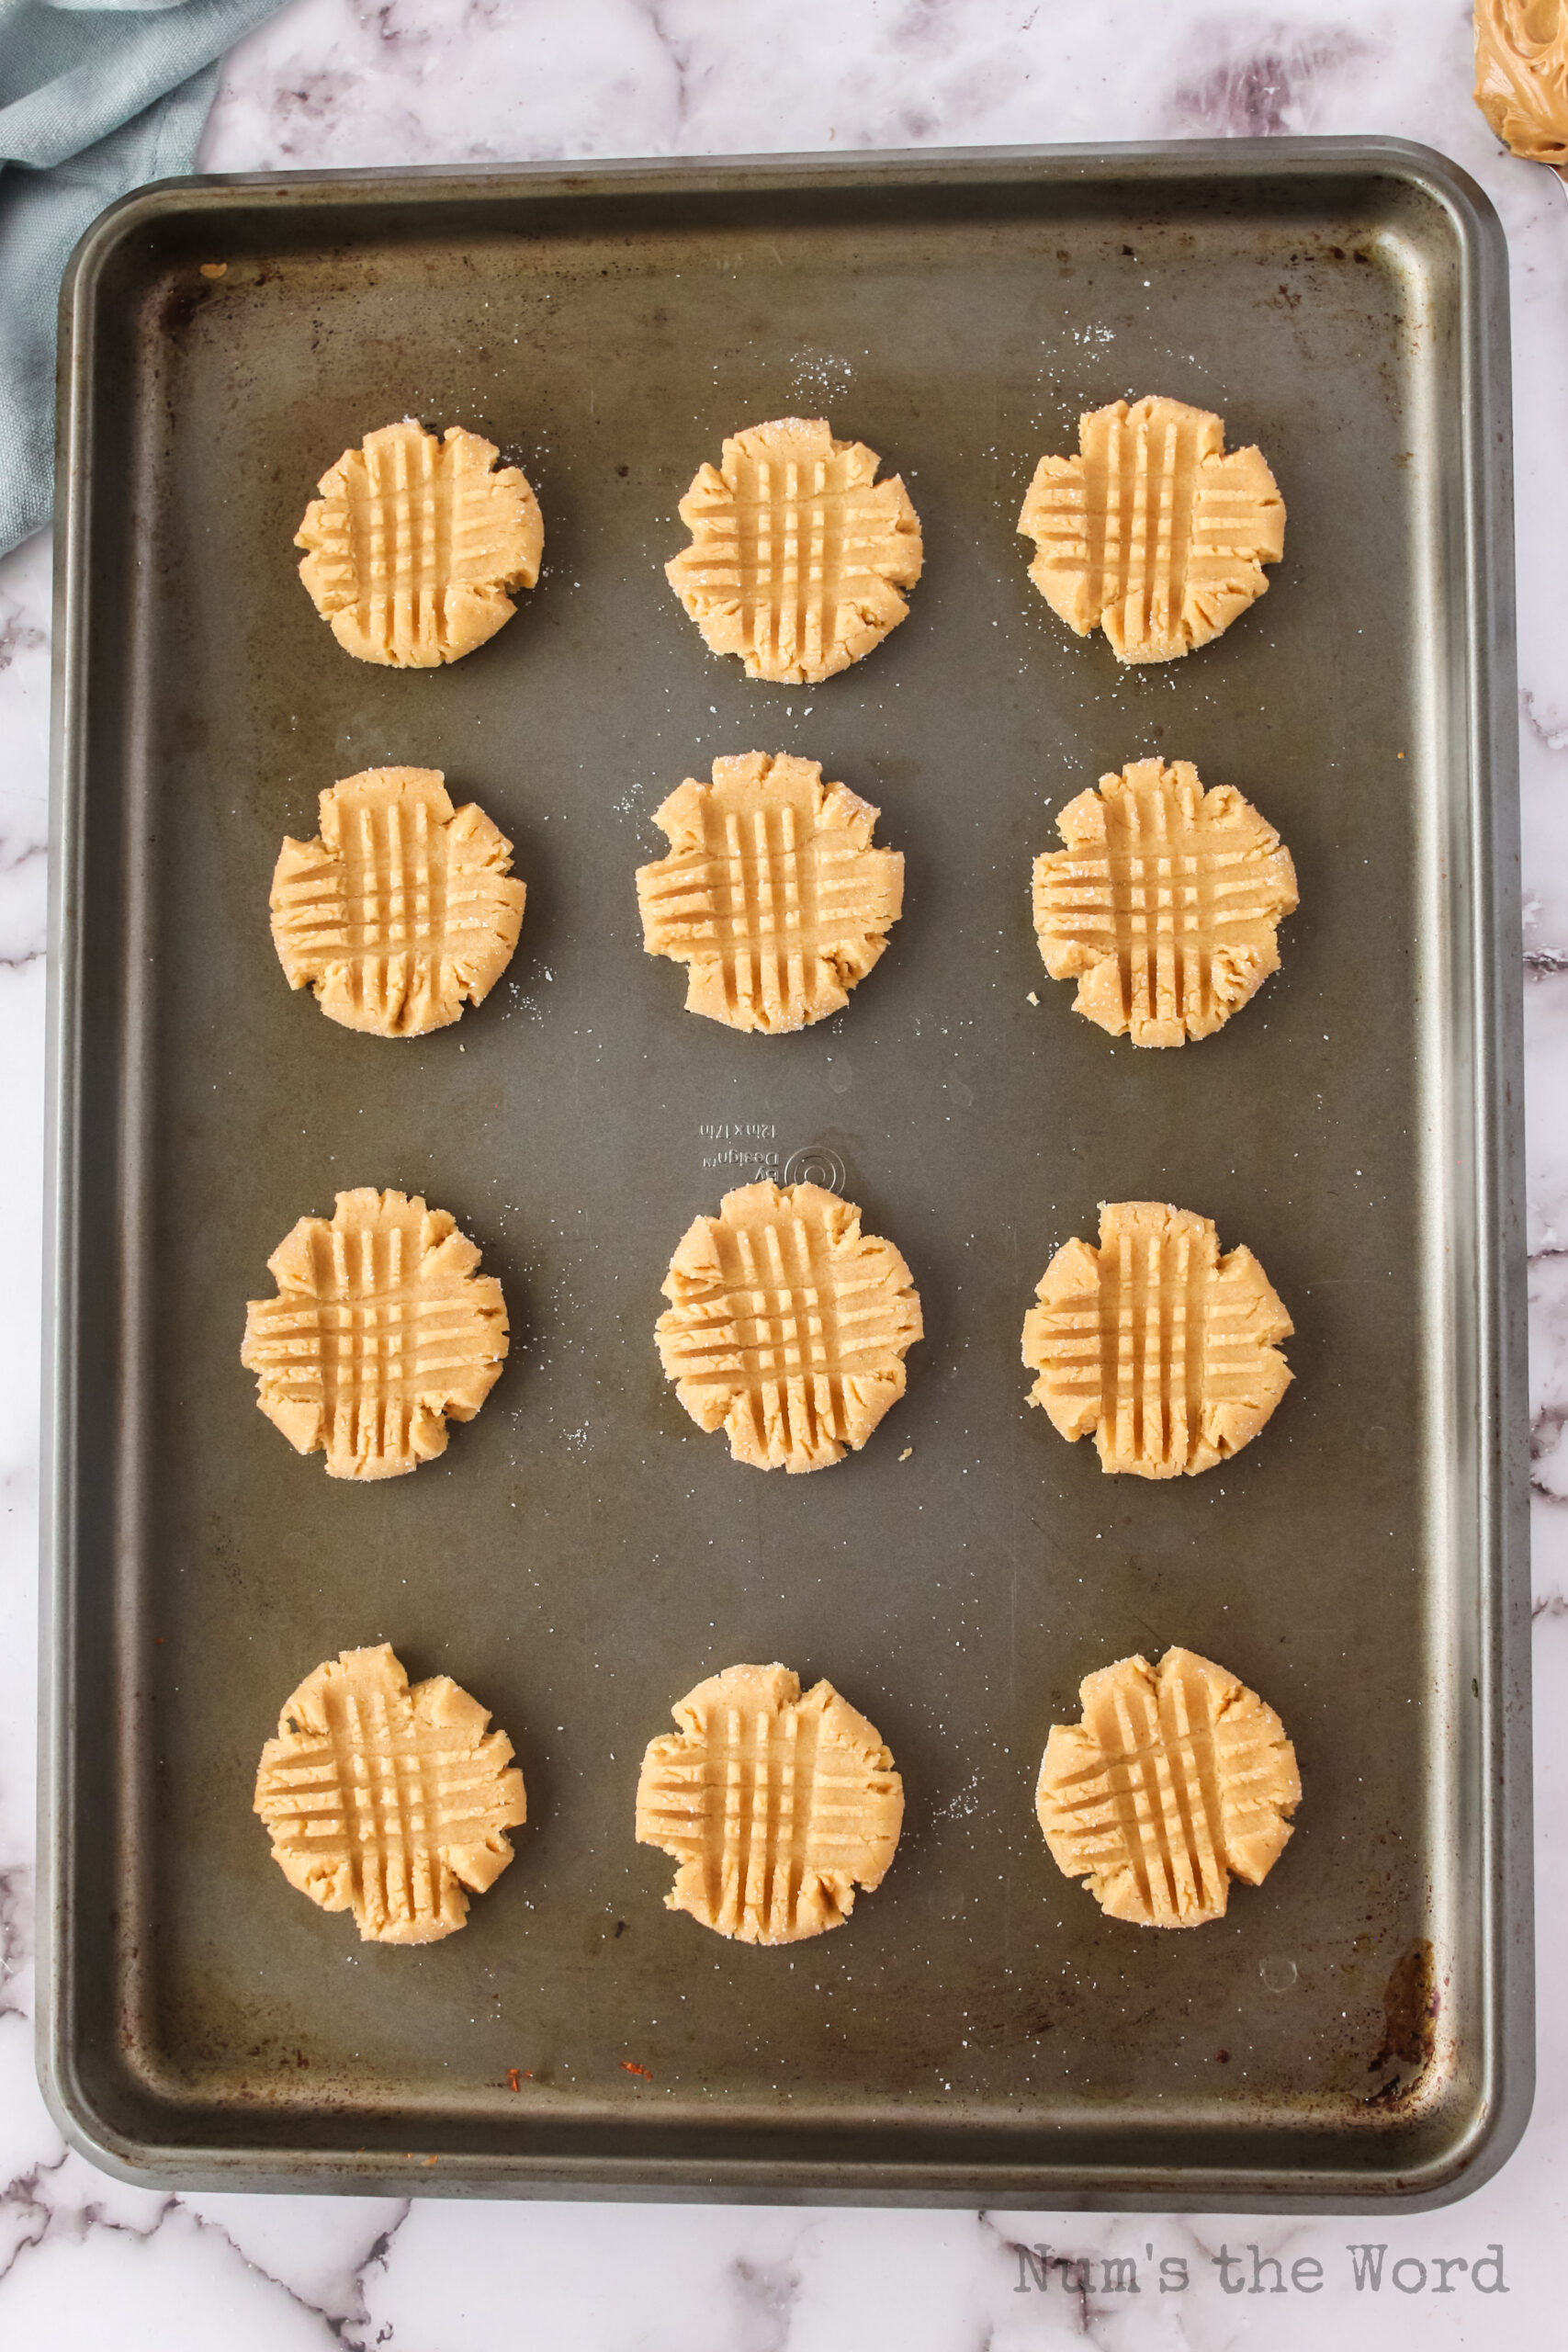 criss crossed fork prints on peanut butter cookies before they are baked